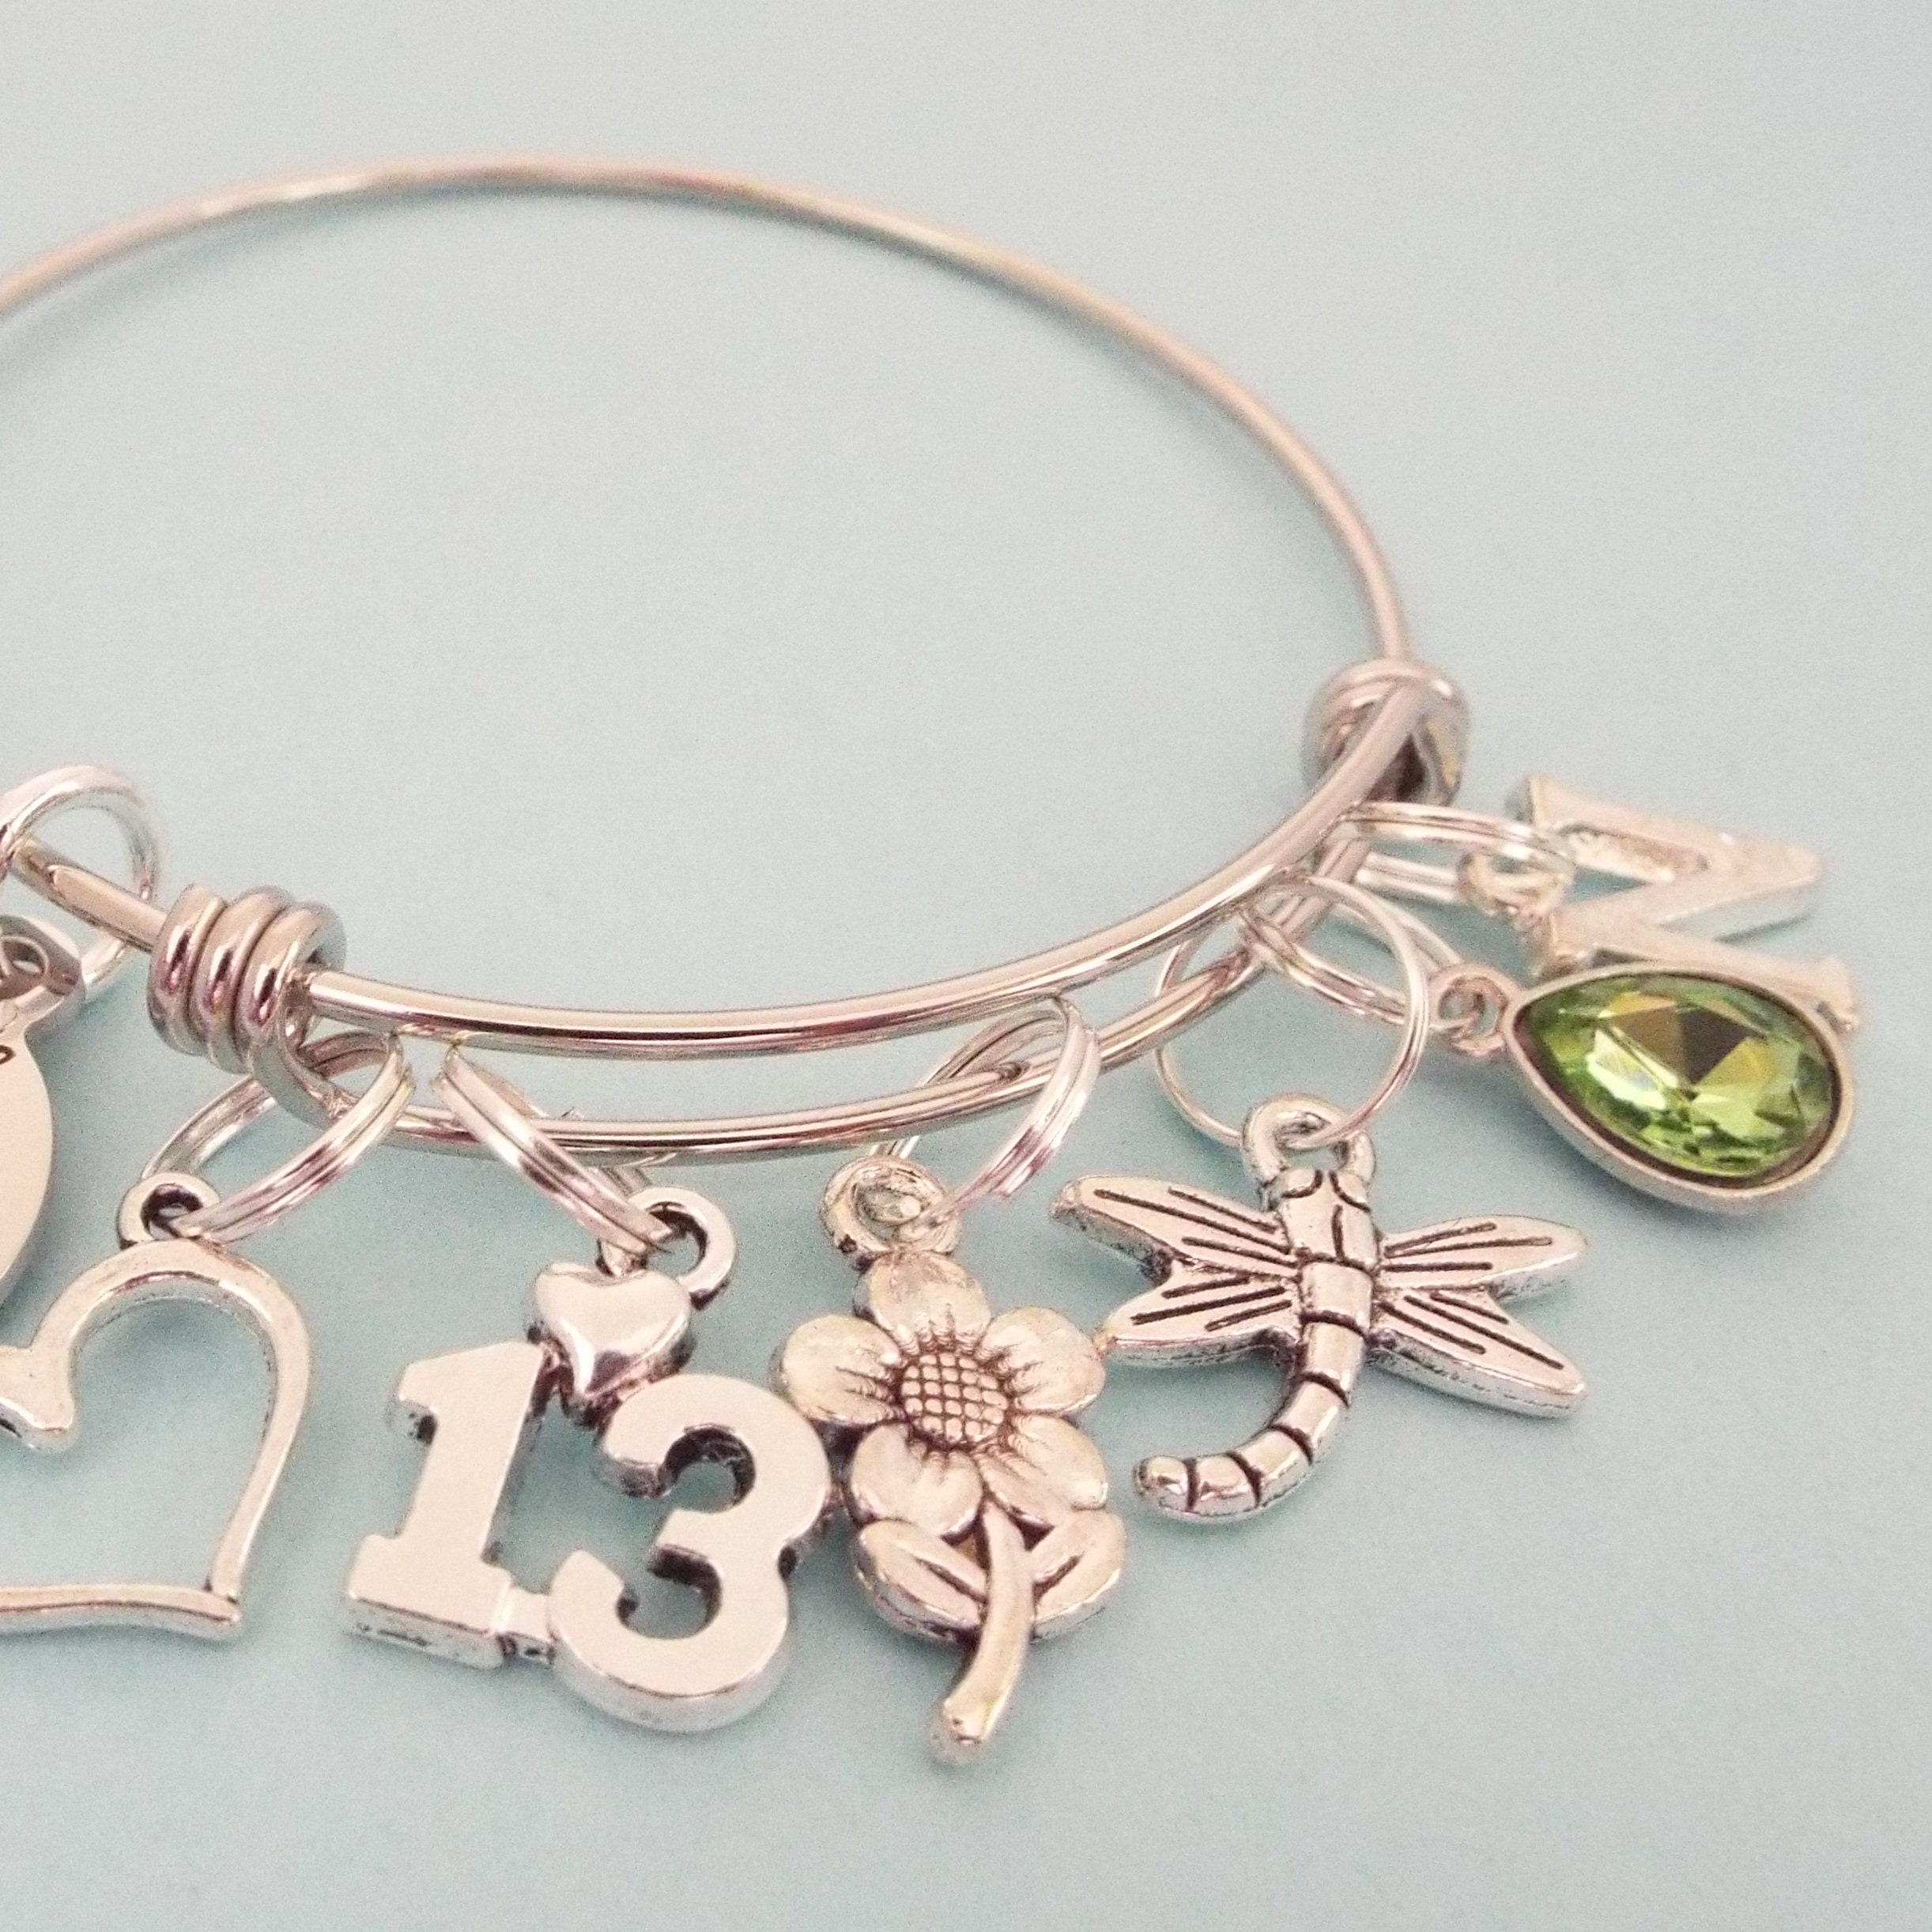 13th birthday gift ideas for daughter